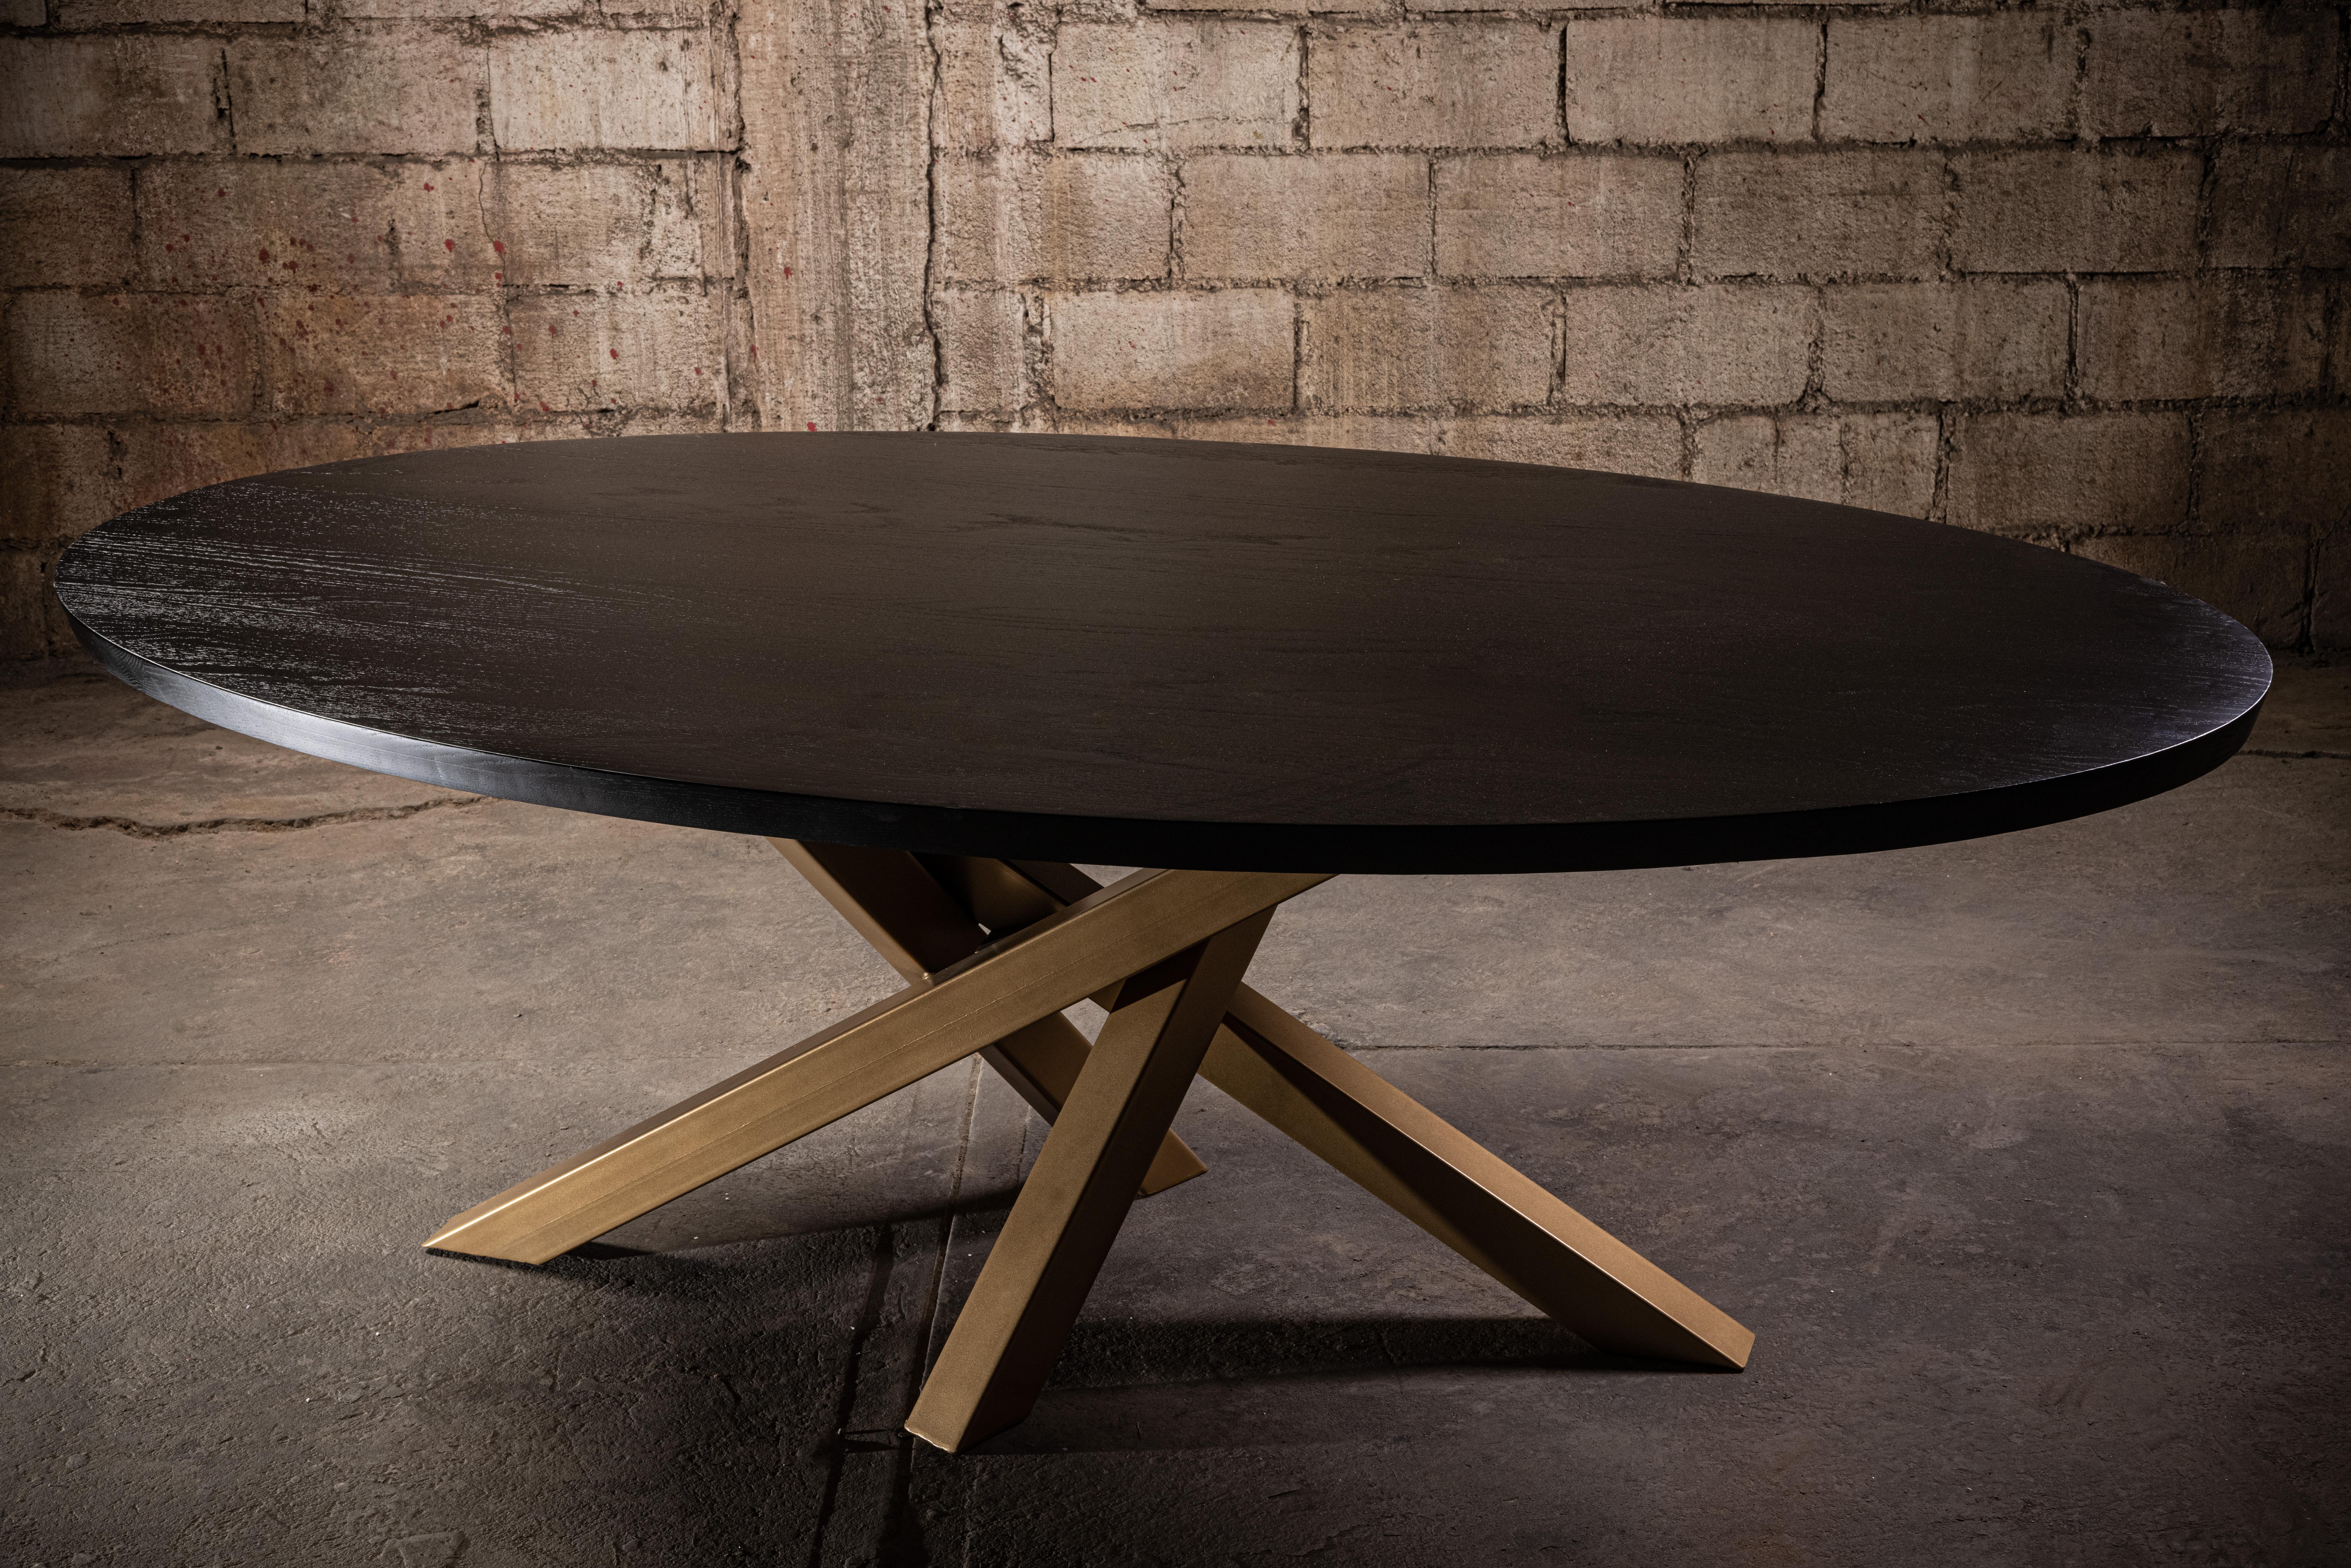 Oval shape, solid black oak tabletop with a smooth finish, 2